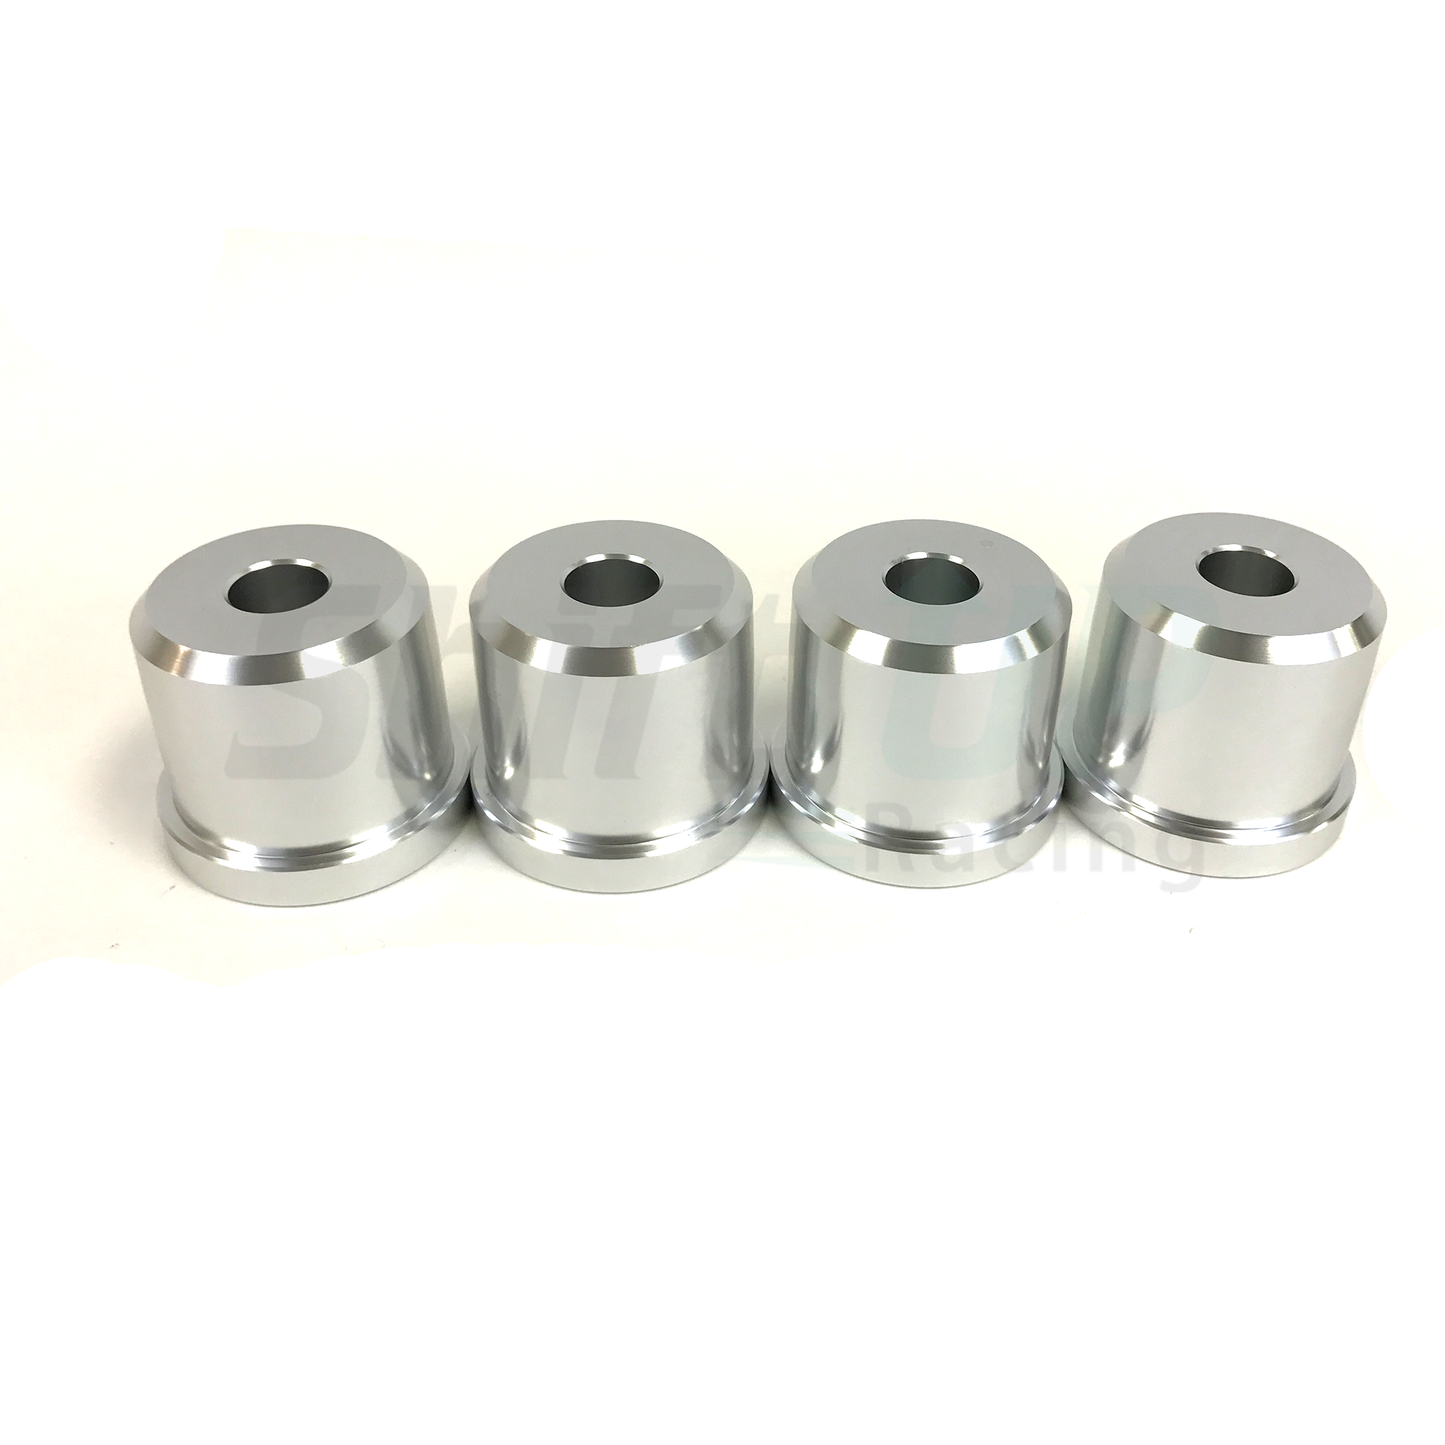 Precision Works Solid Aluminum Subframe Bushings - Nissan 240SX - Shift Up Racing